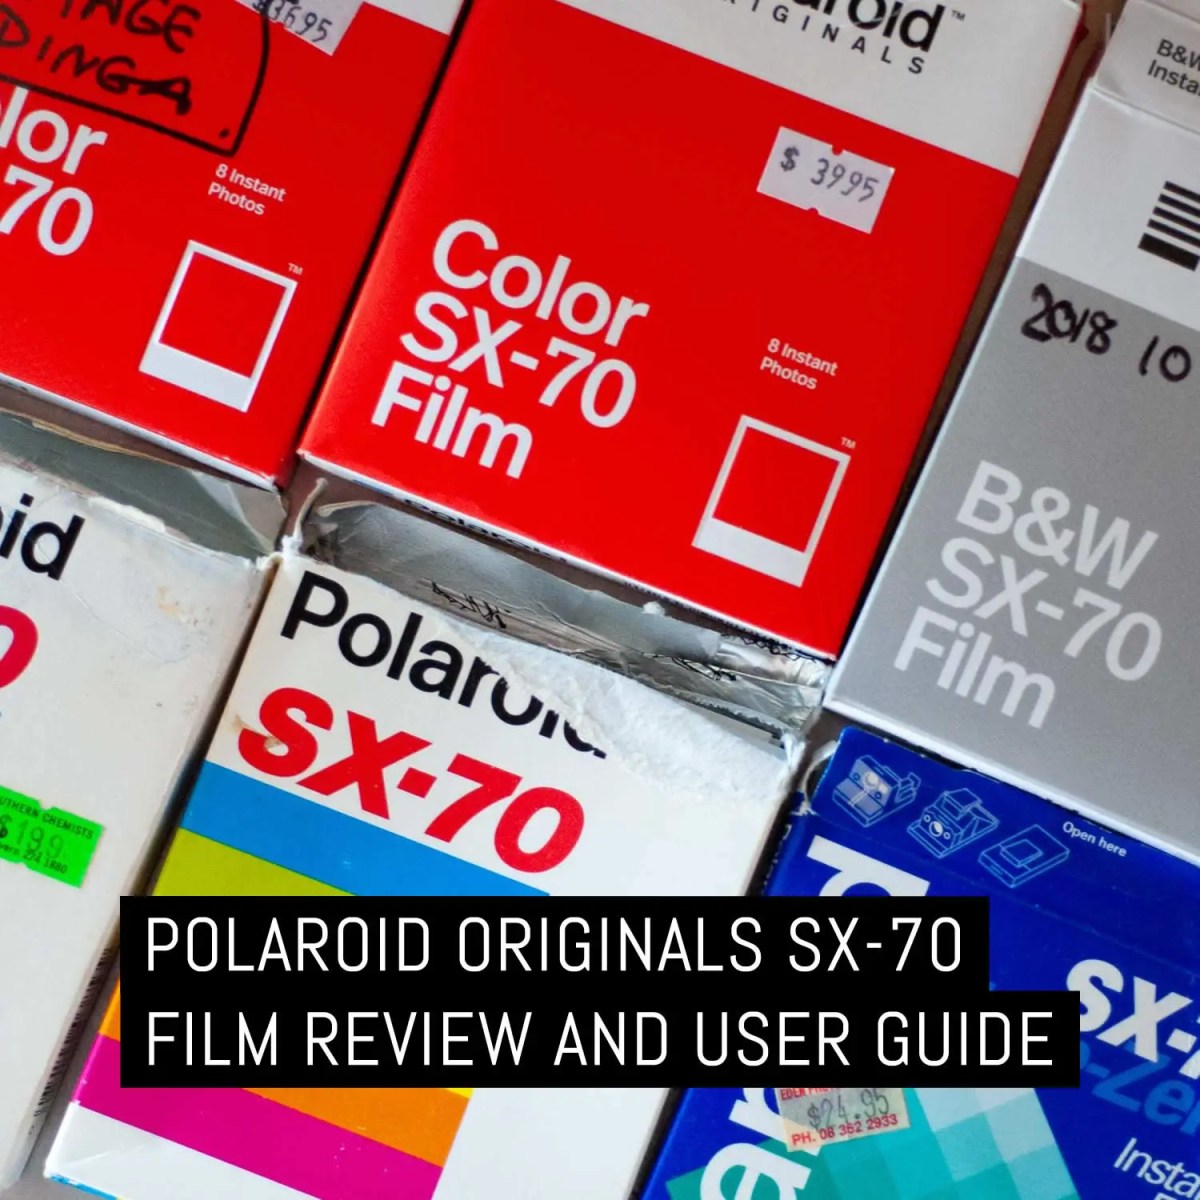 Cover: Impossible-Polaroid Originals SX70 film review and user guide